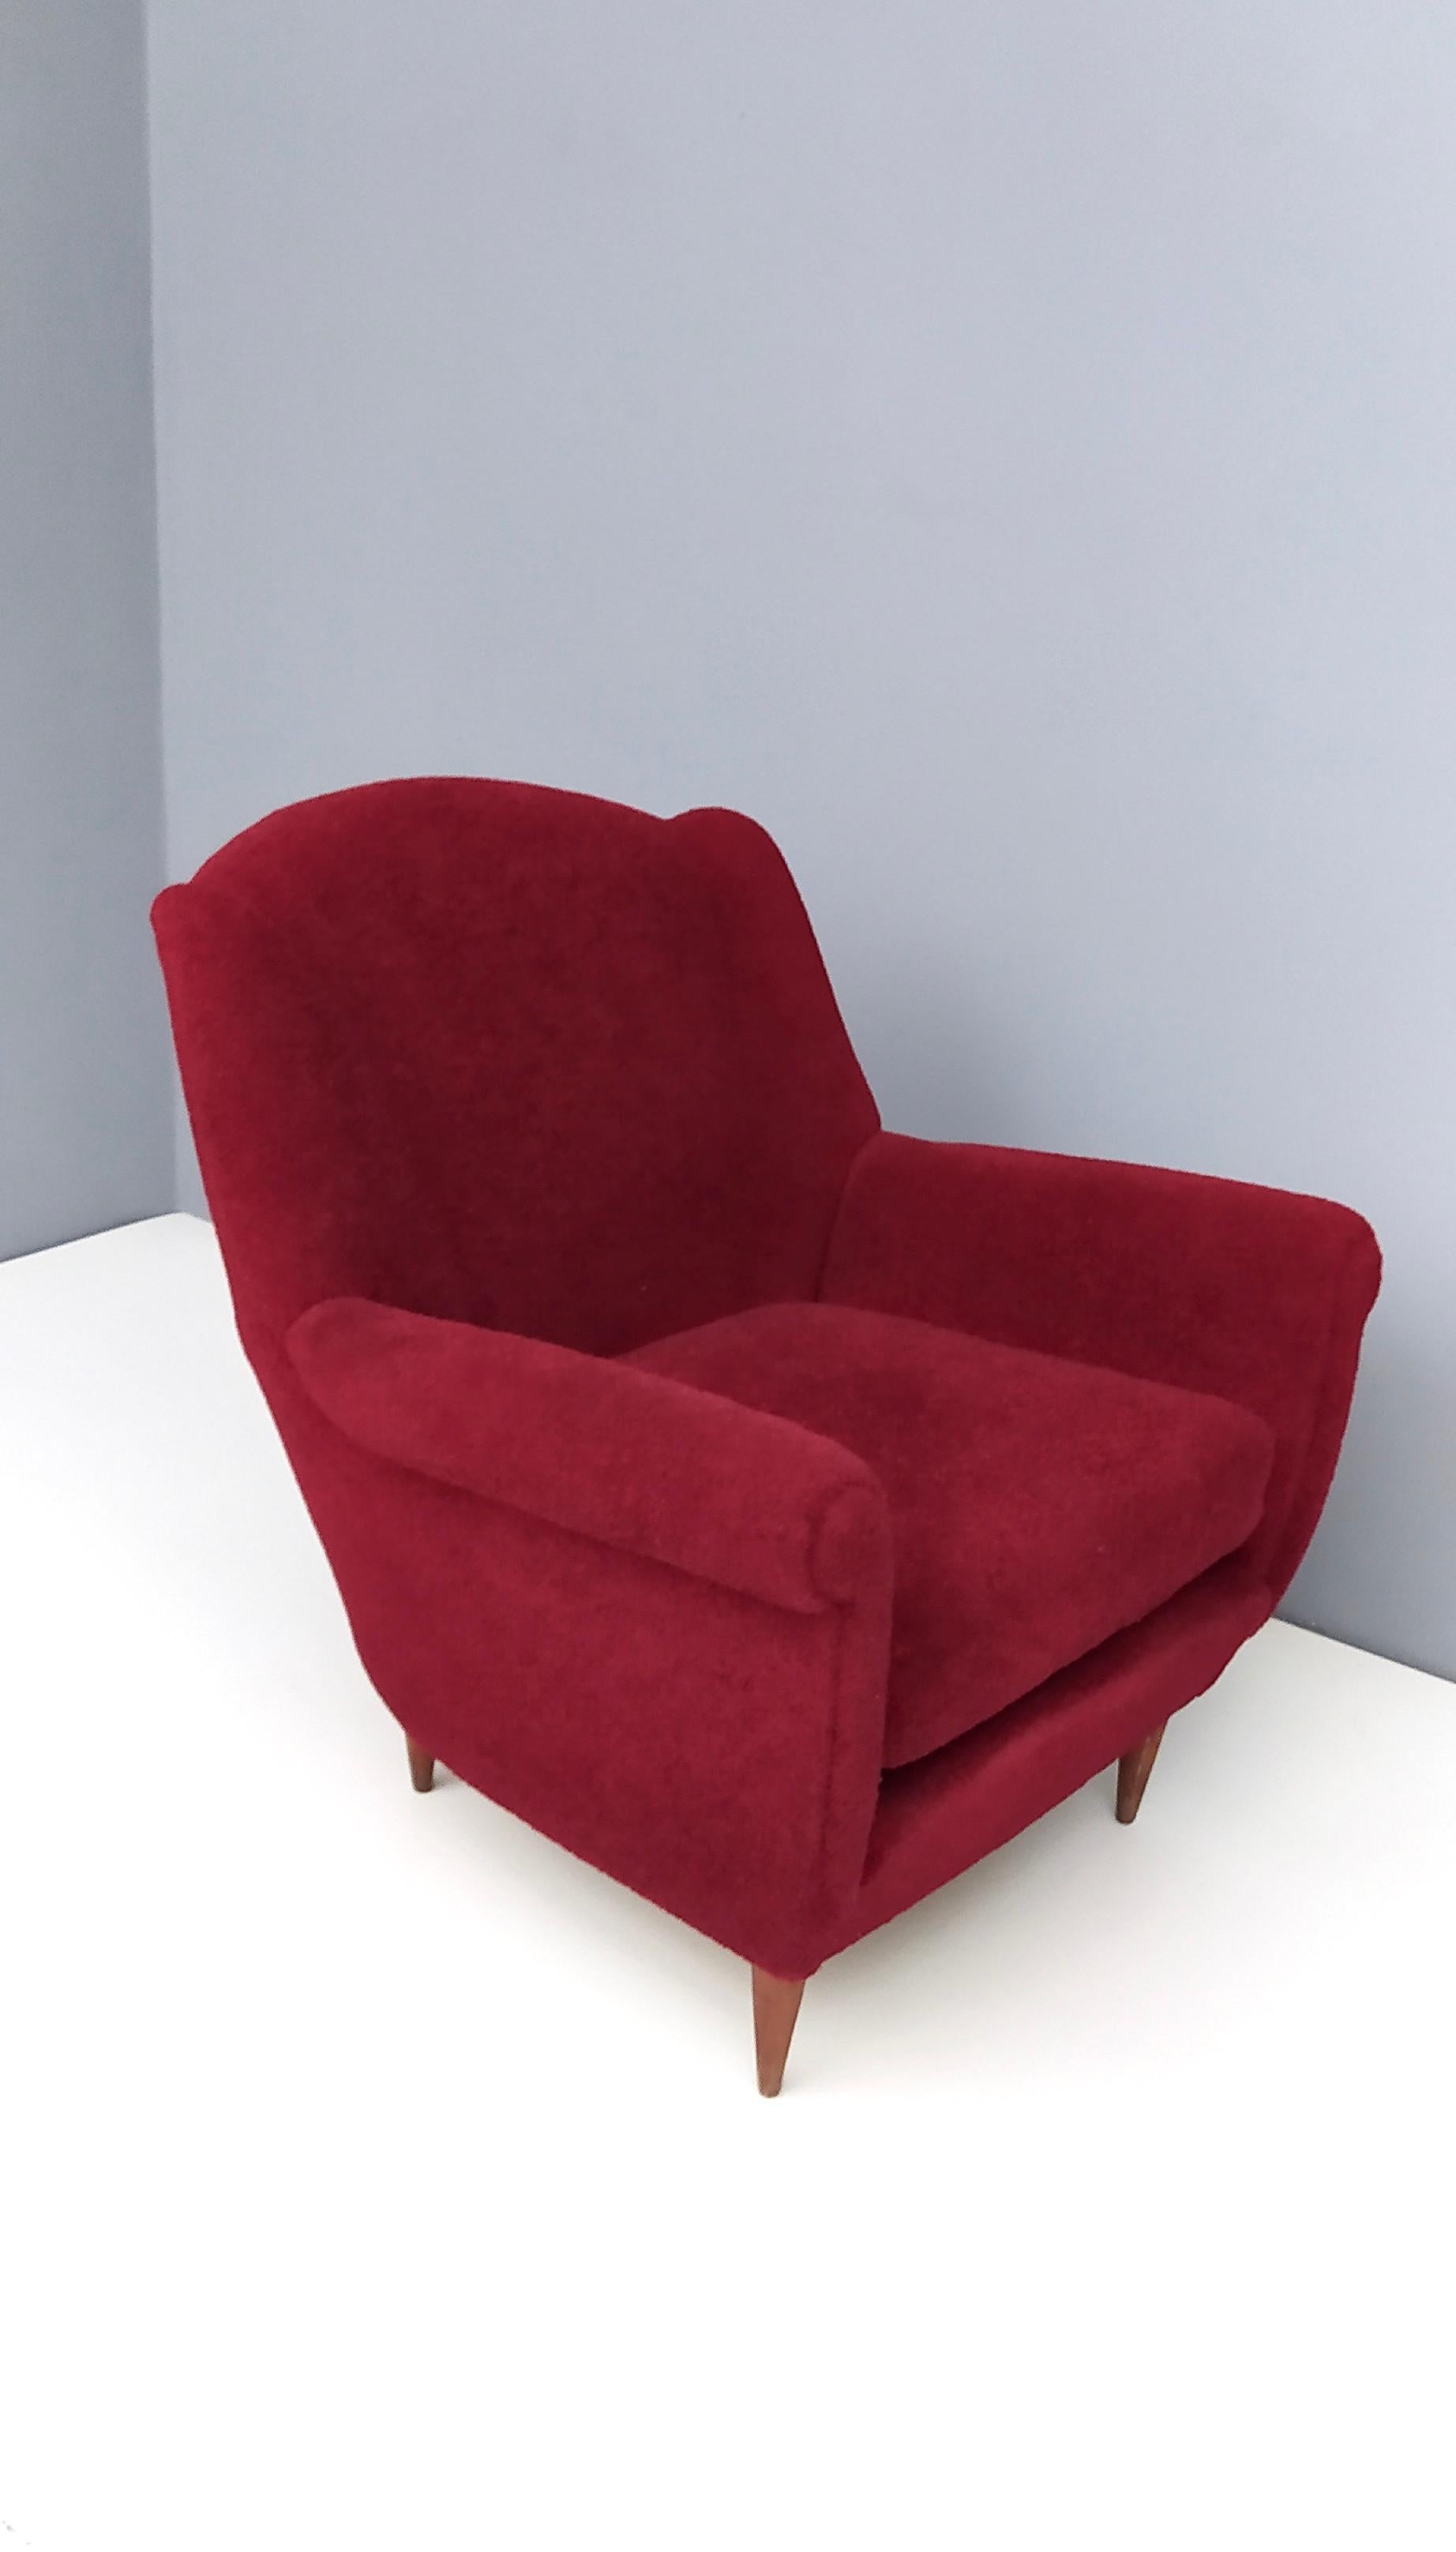 Mid-20th Century Pair of Crimson Upholstered Armchairs by Gigi Radice for Minotti, Italy, 1950s